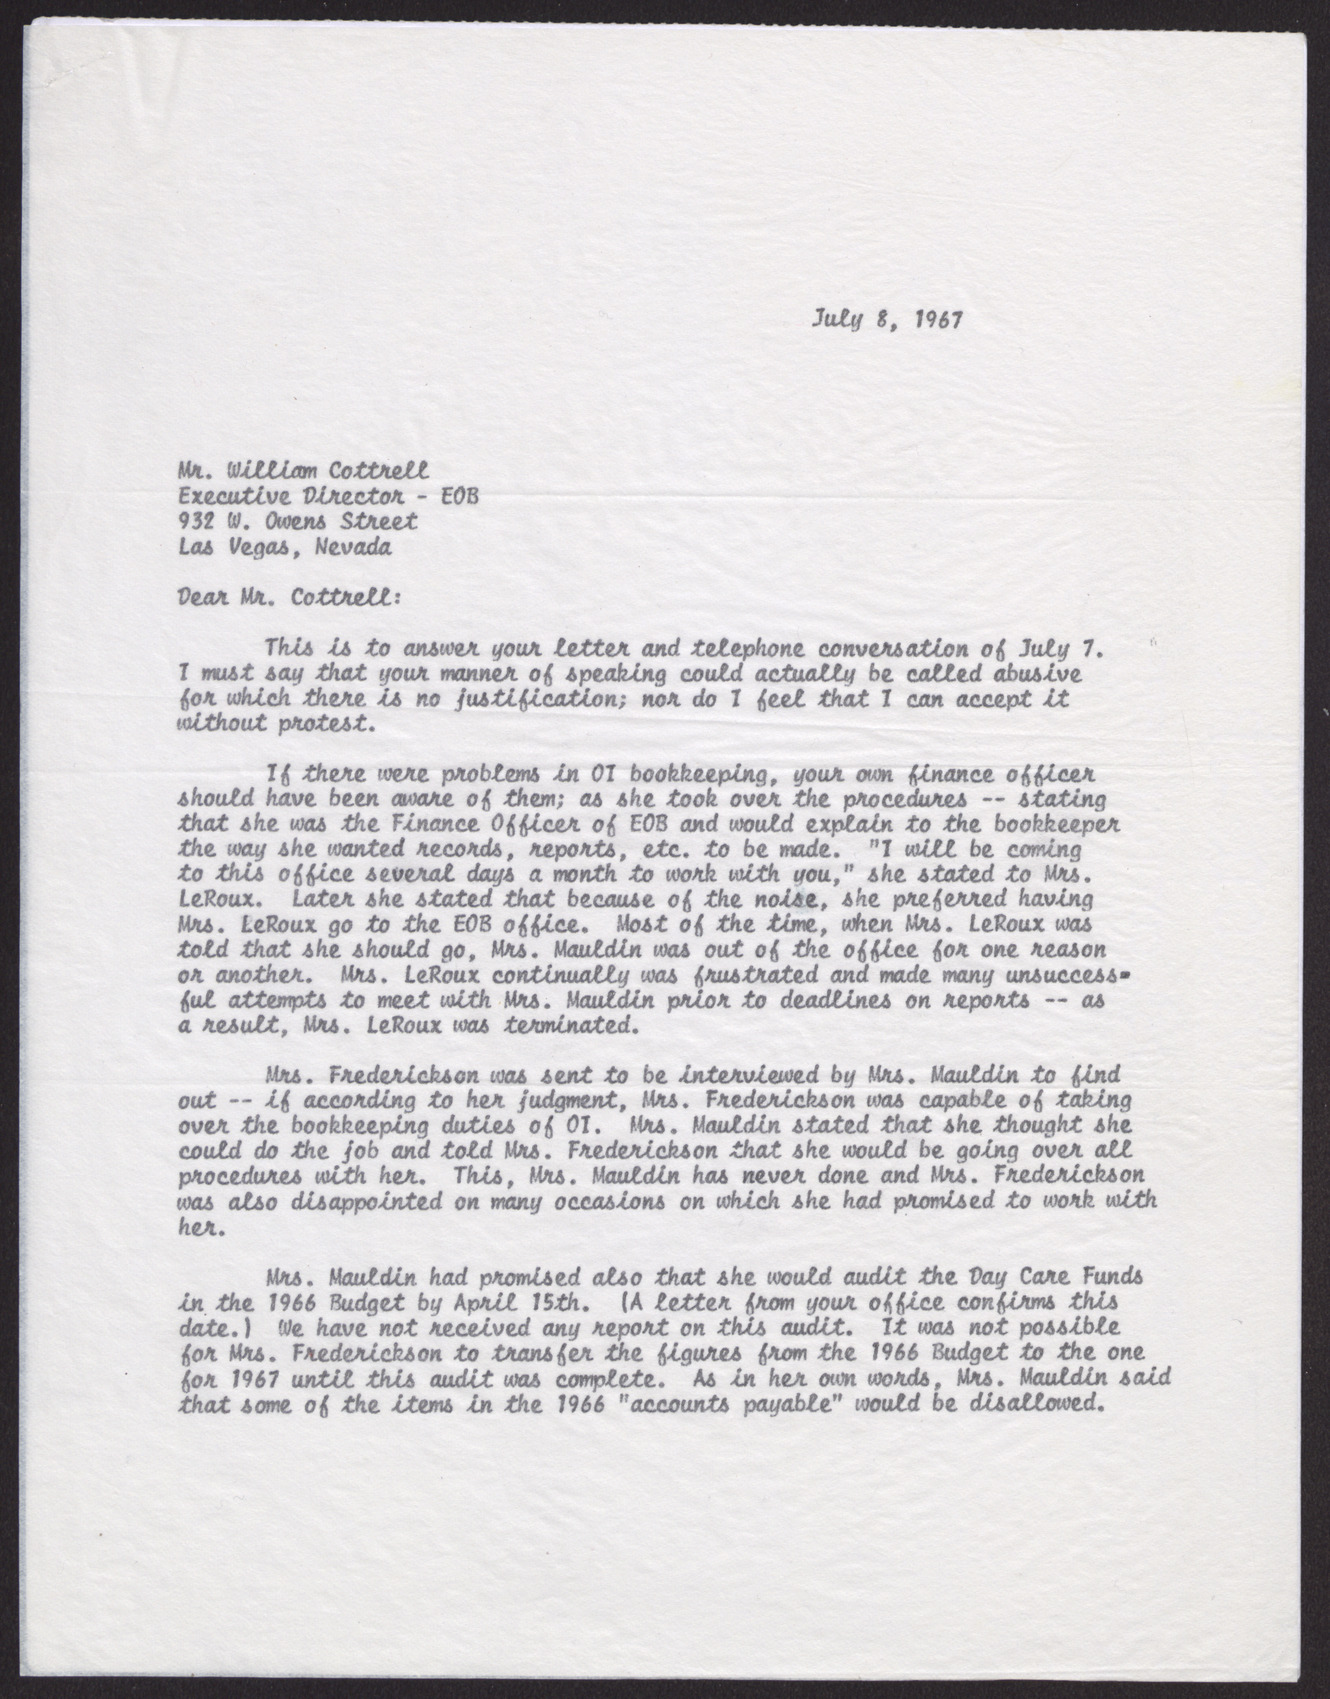 Letter to Mr. William Cottrell from Lubertha M. Johnson (2 pages), July 8, 1967